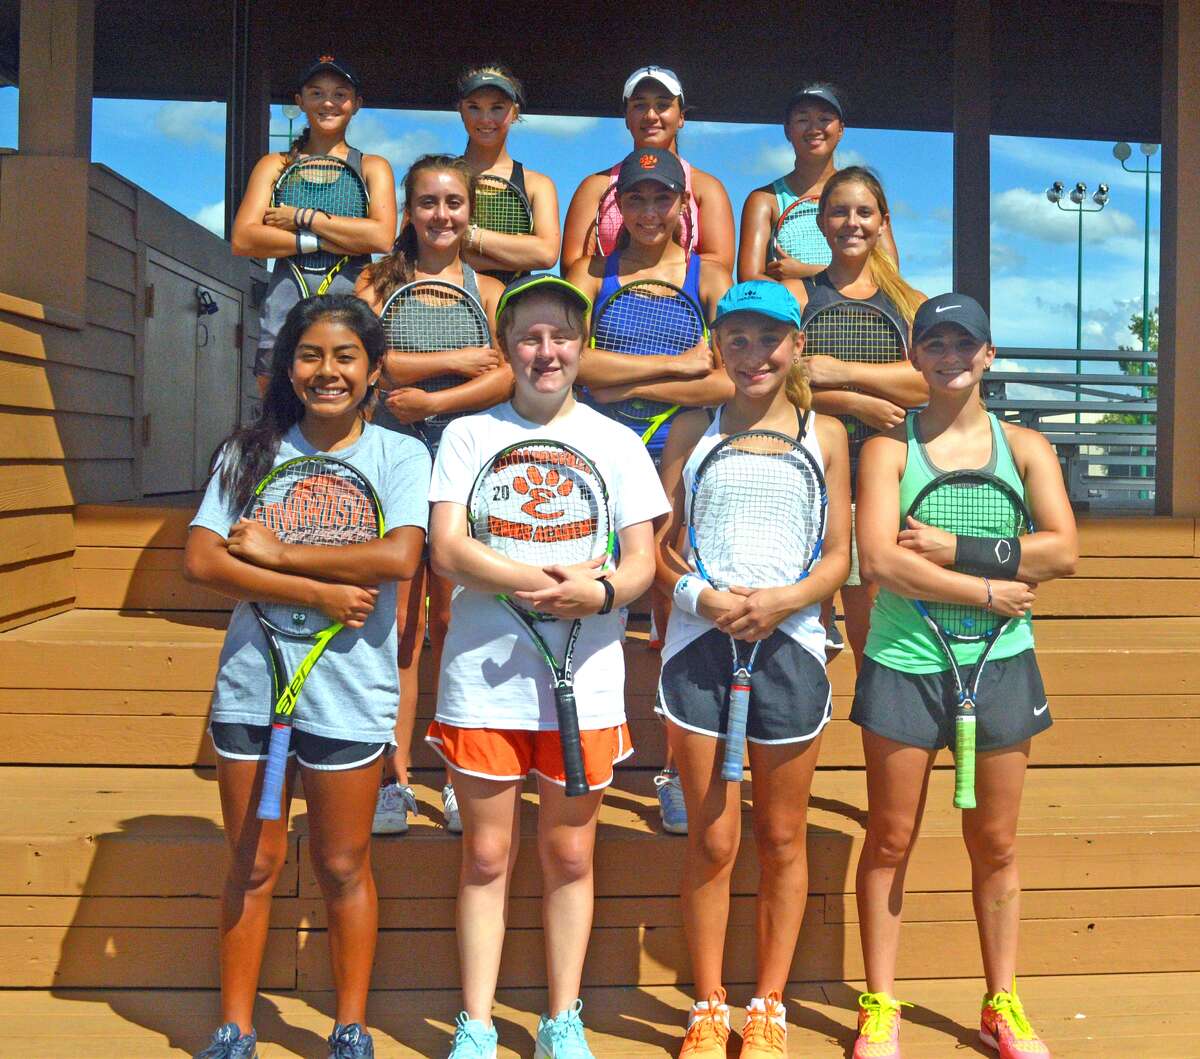 Varsity players for the Edwardsville girls’ tennis team are, front row from left, Chloe Trimpe, Maren Heidt, Grace Hackett and Abby Cimarolli. In the middle row from left are Alyssa Wilson, Hayley Earnhart and Many Schreiber. In the back row from left are Grace Dessem Annie McGinnis, Natalie Karibian and Tymei Dappert.